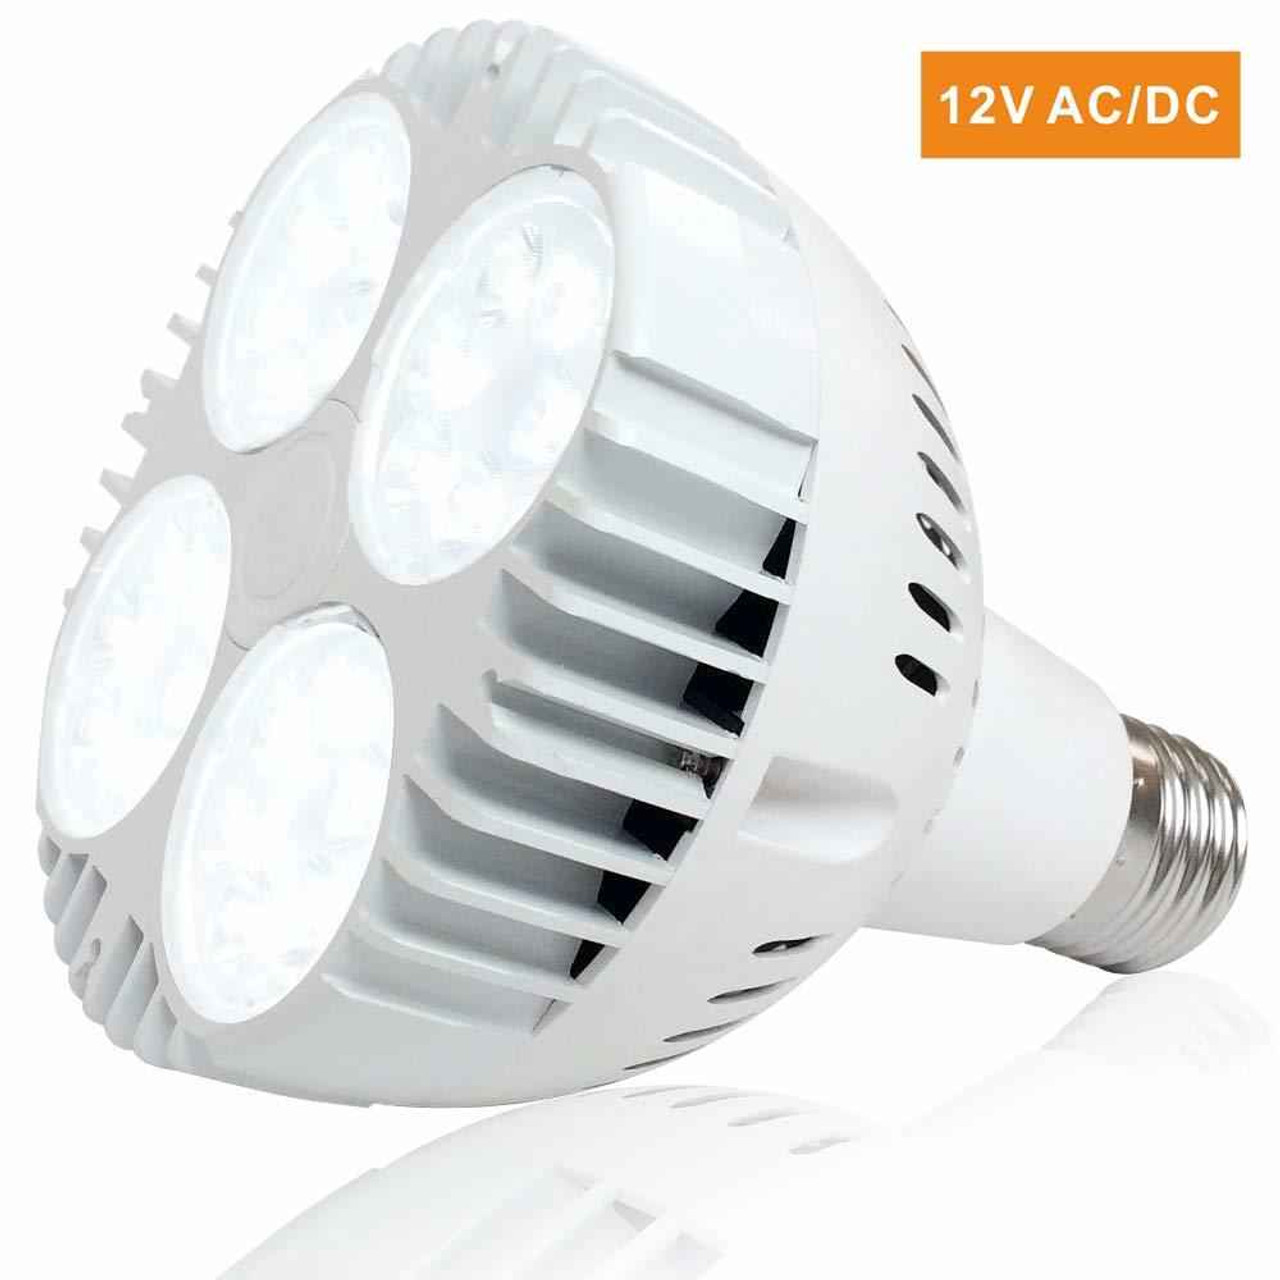 https://cdn11.bigcommerce.com/s-zpc9h4zneo/images/stencil/1280x1280/products/2089/1300/dg-pool-products-12v-35w-led-pool-light-bulb-3600lm-6000k-daylight-white-led-swimming-pool-light-bulb-replaces-up-to-200-600w-traditionnal-bulbacdc__49975.1600048072.jpg?c=2